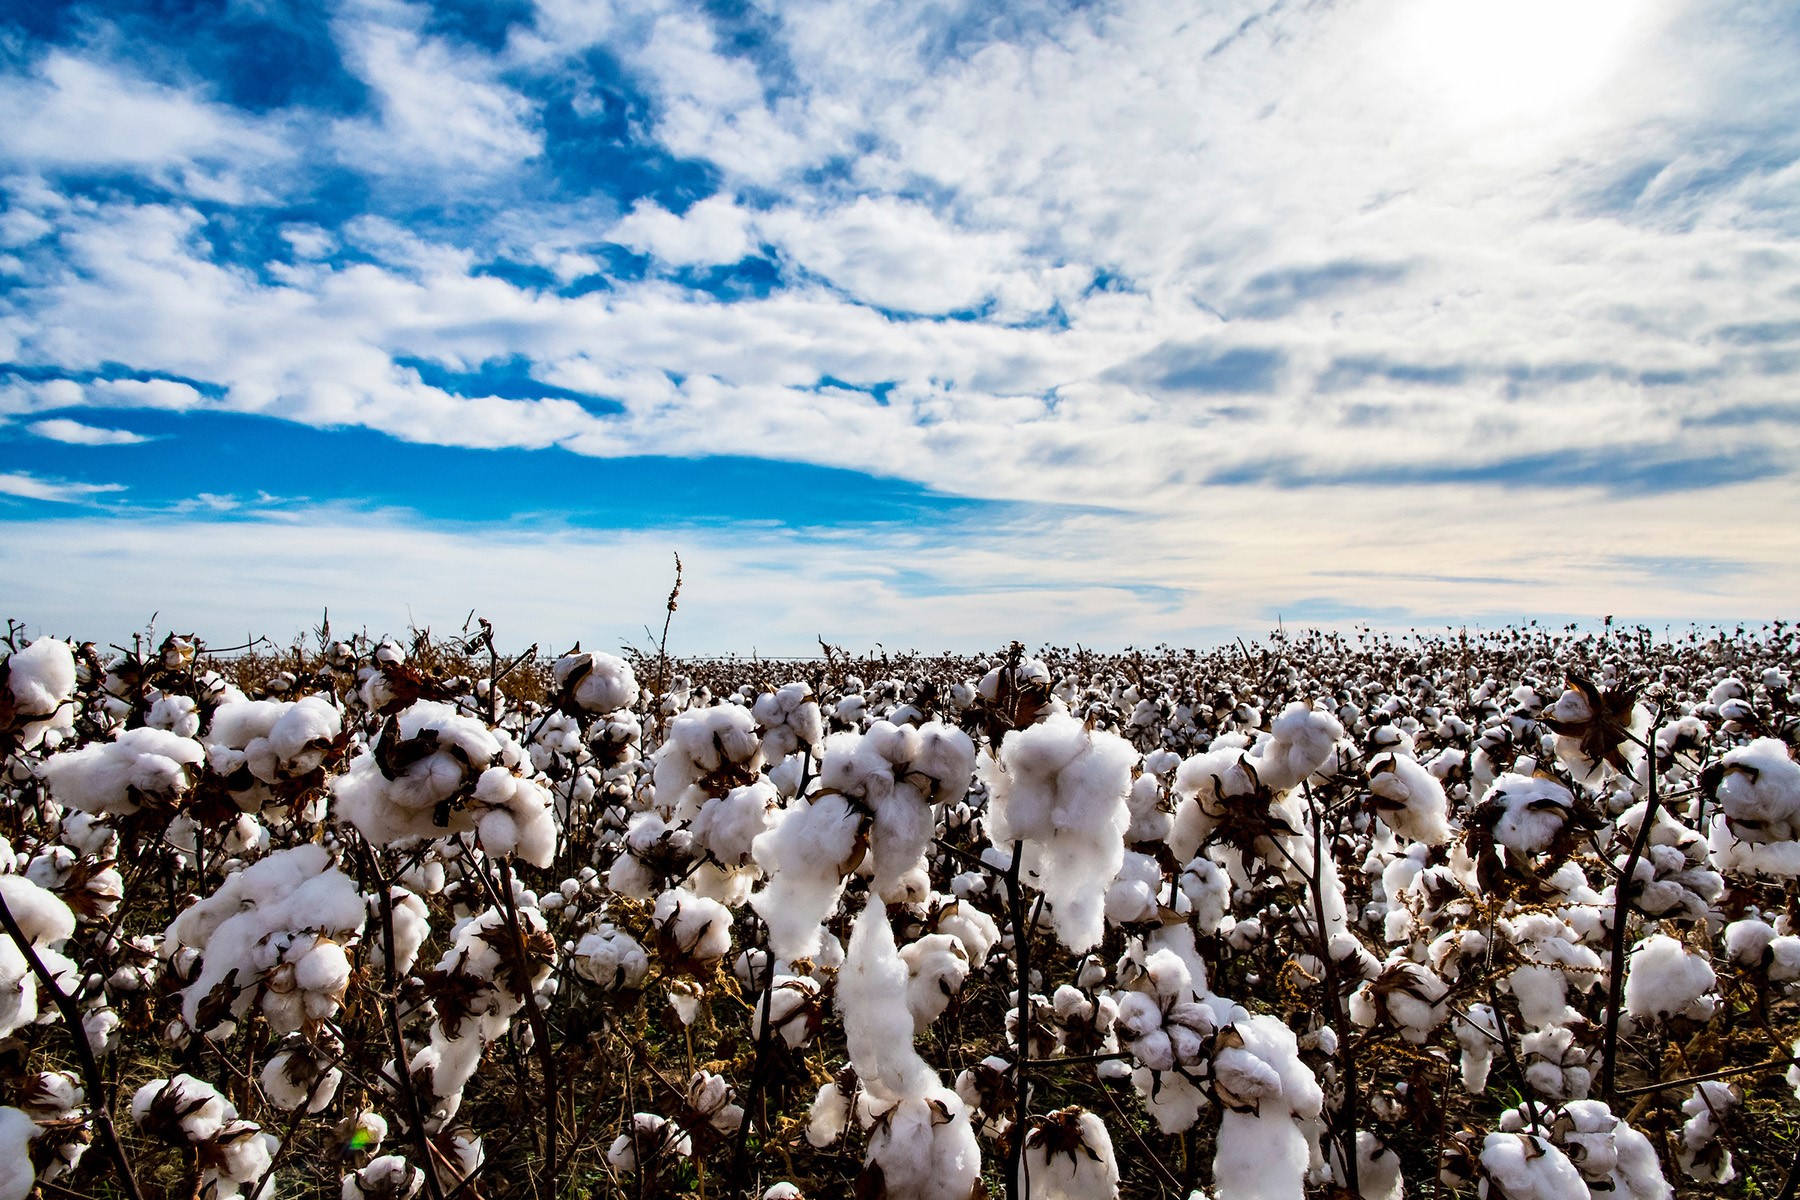 Cotton Acreage Continues Climb in Northern Texas Panhandle